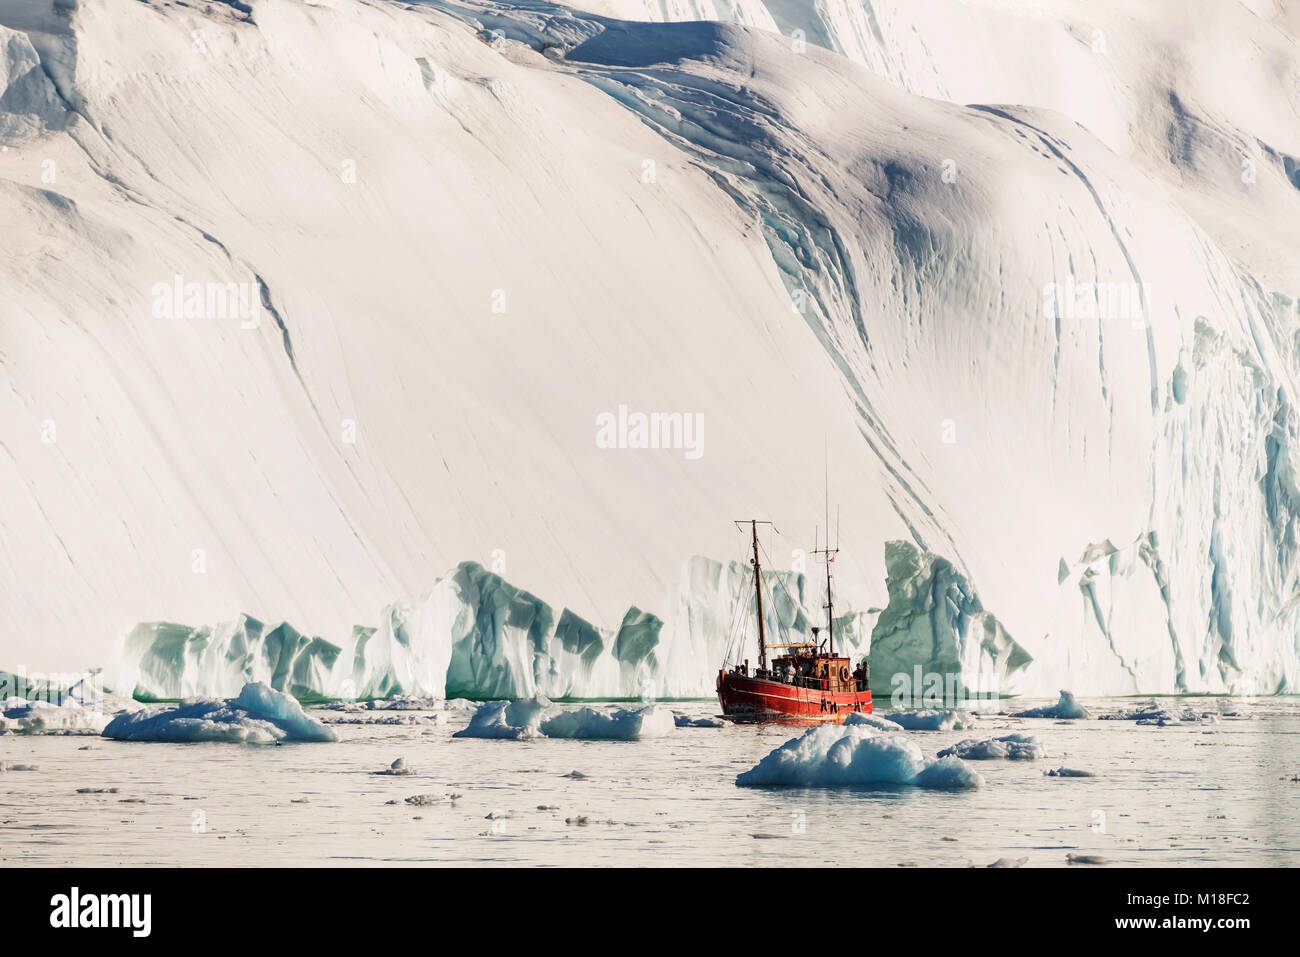 Red boat in front of gigantic iceberg,West Greenland,Greenland Stock Photo